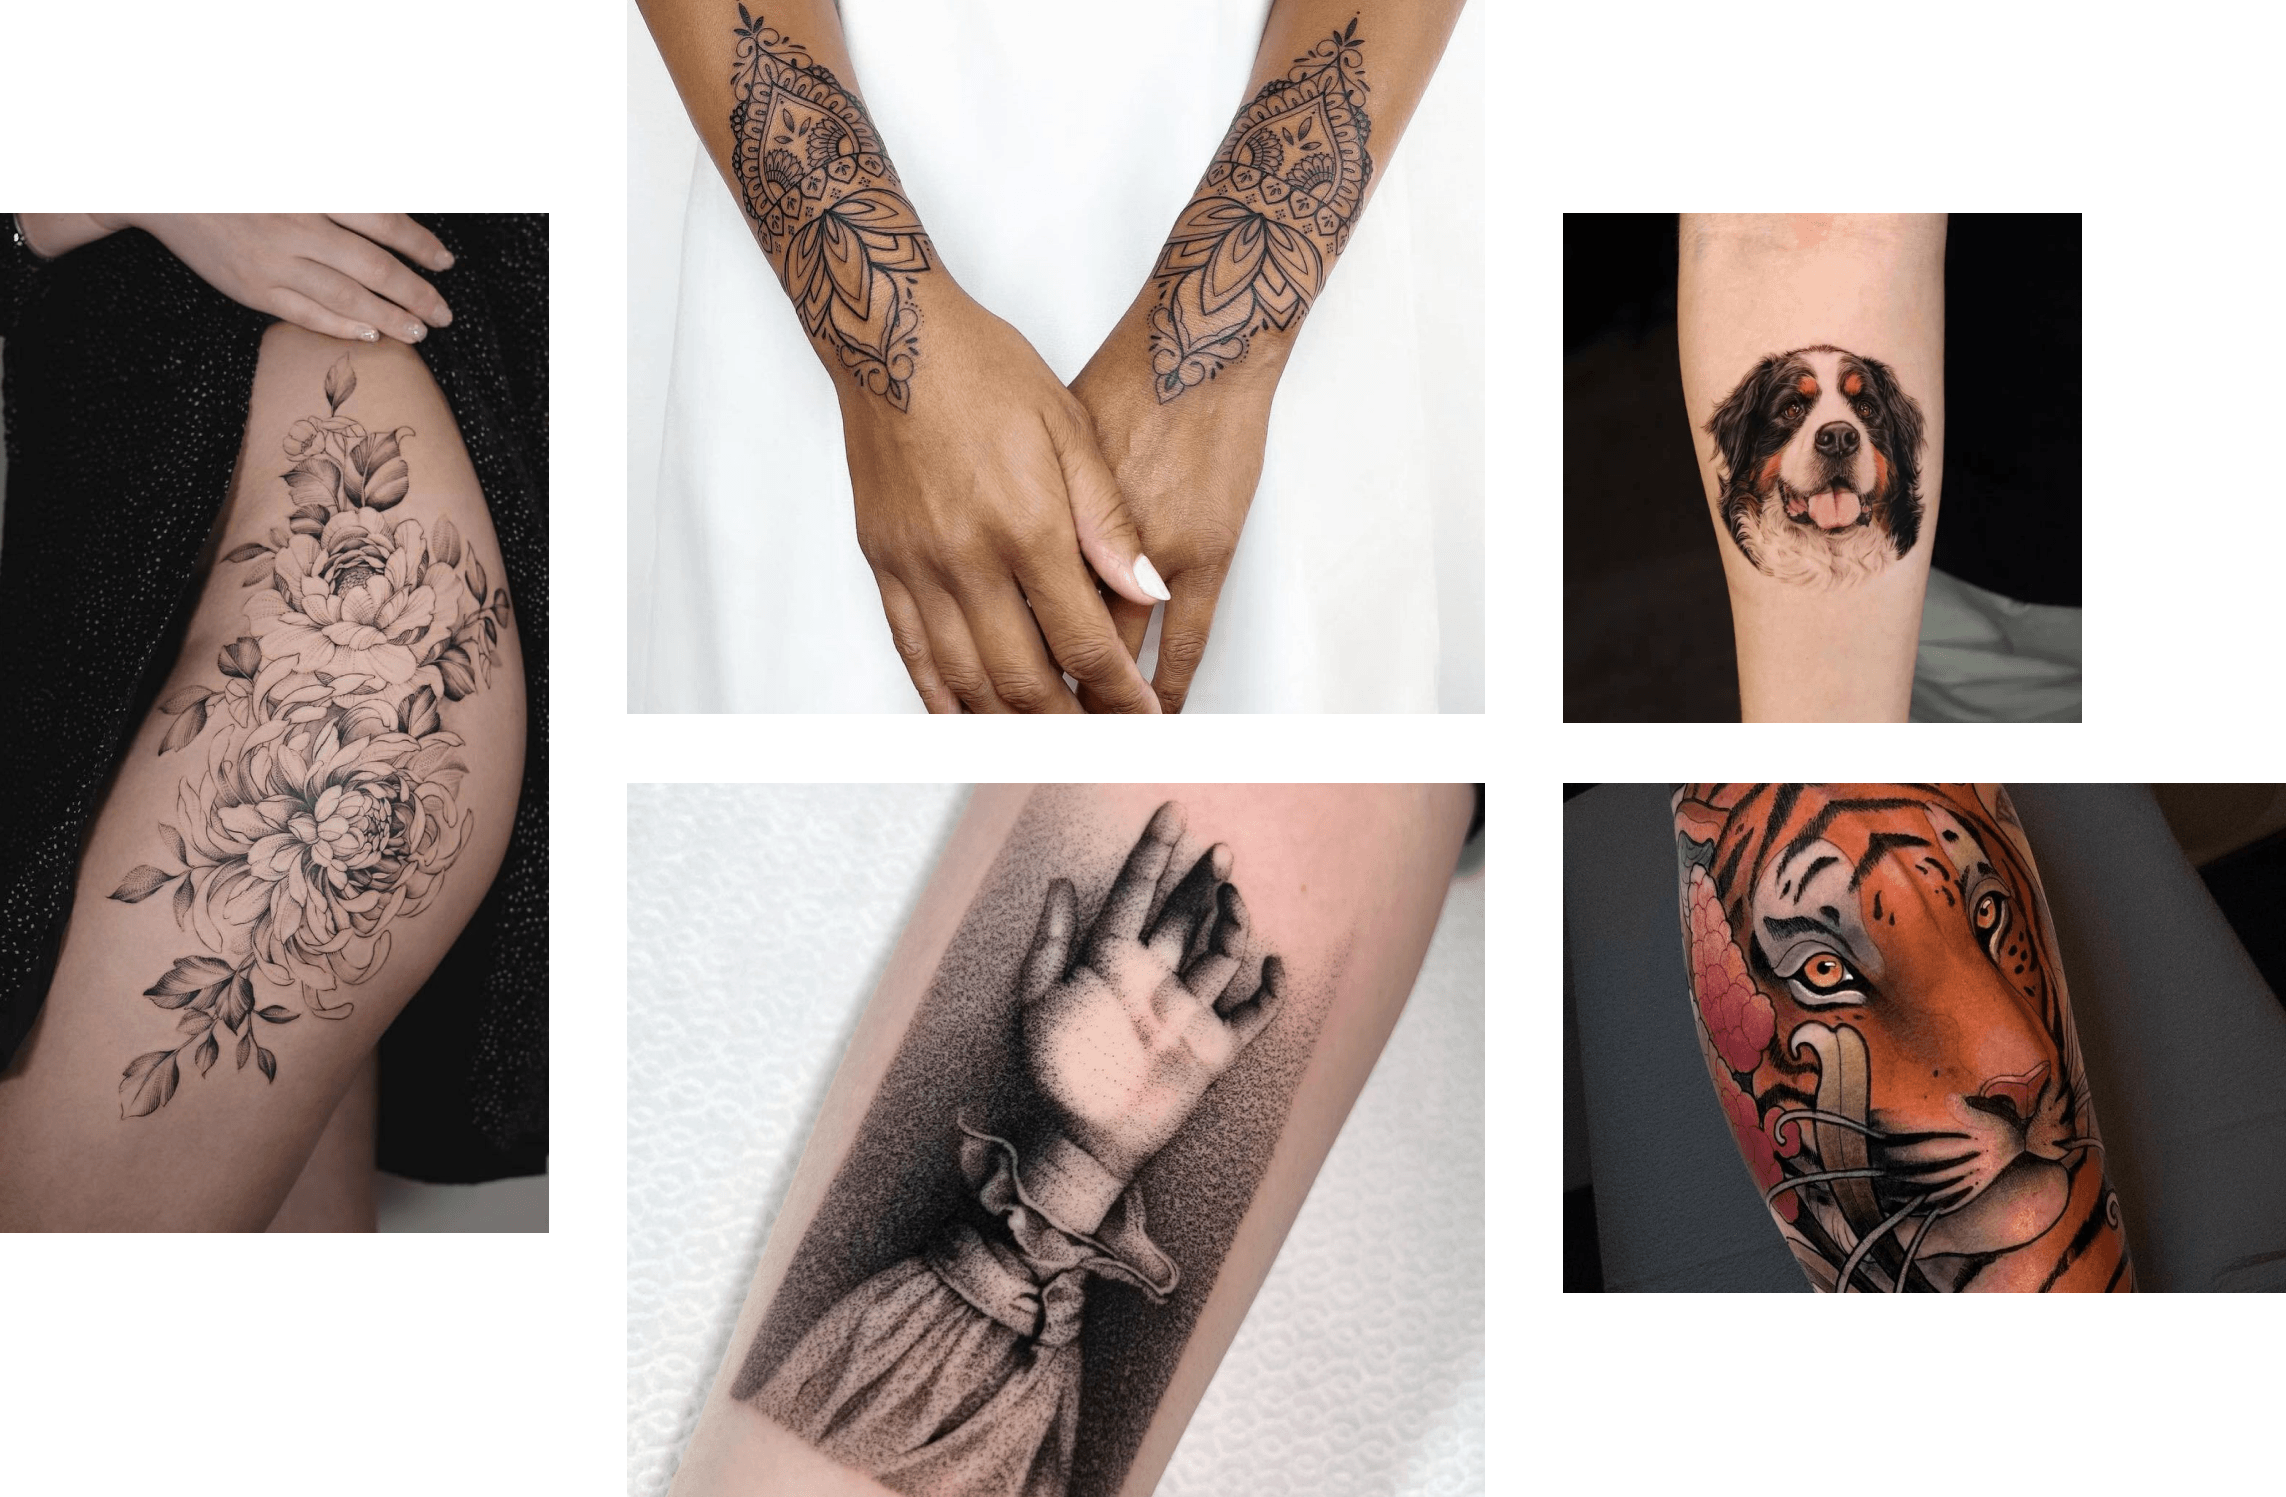 10 Self Love Tattoos That'll Remind You To Love Yourself | Preview.ph